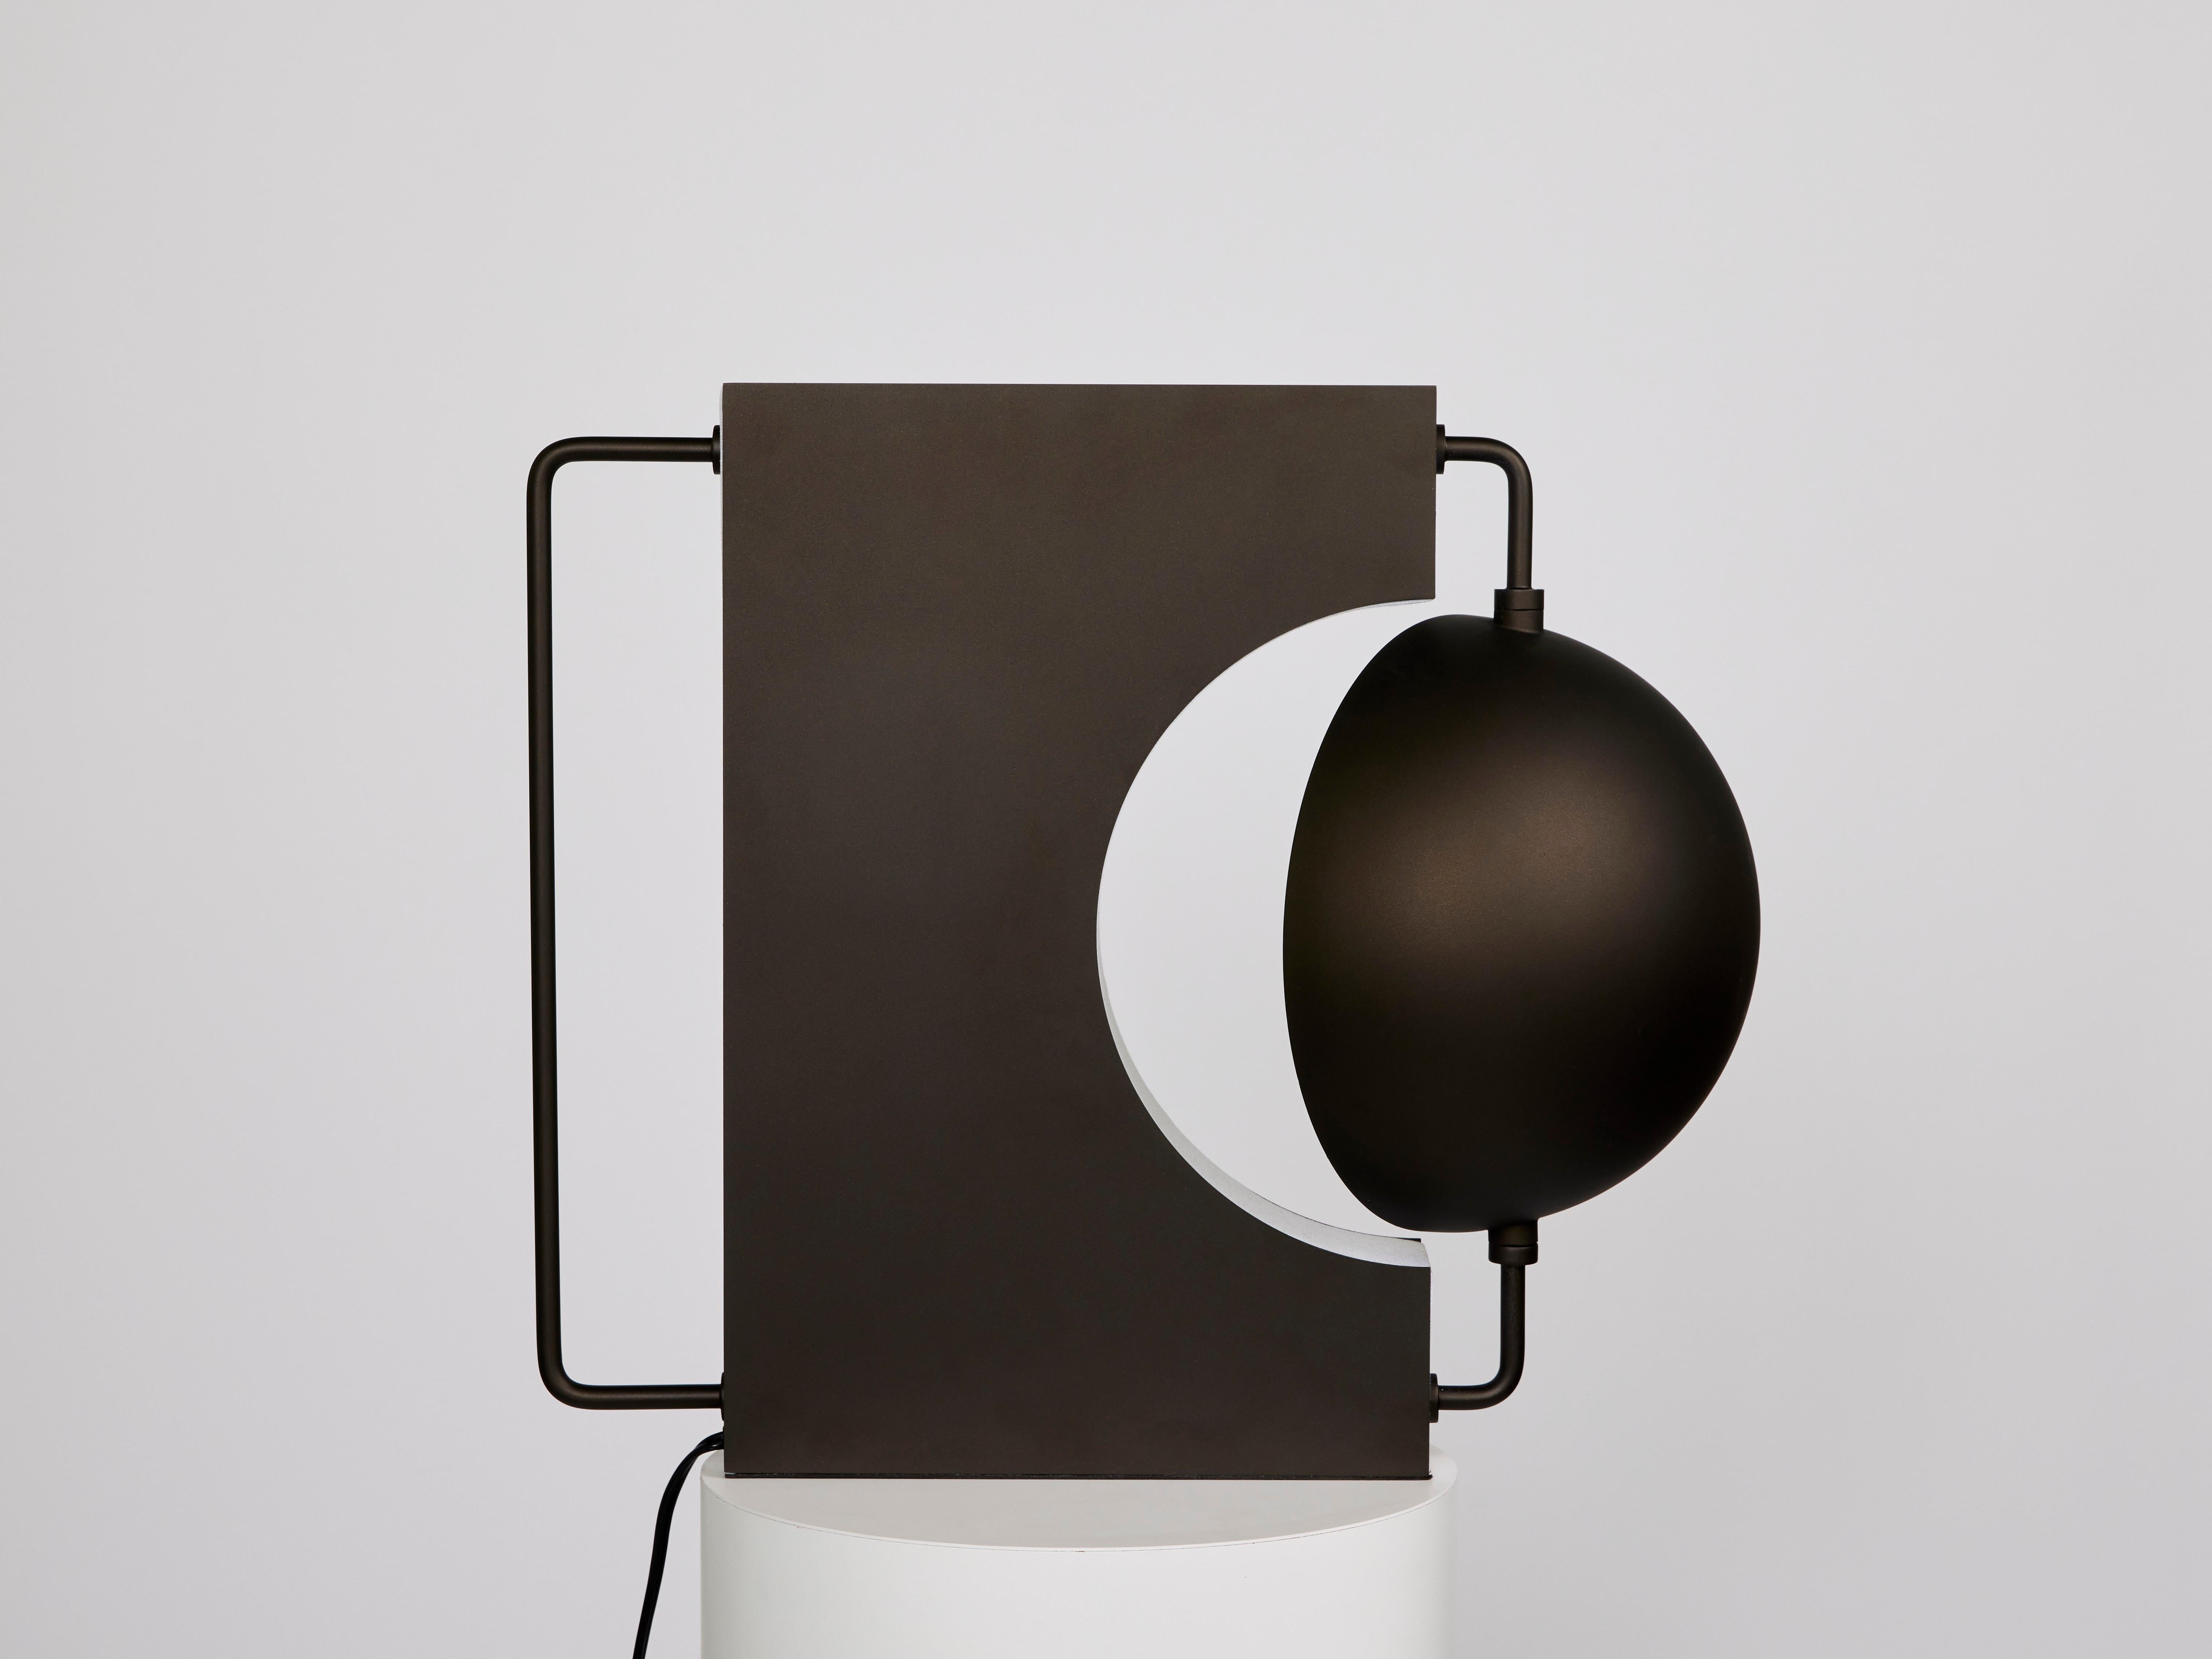 Half Table Lamp (Black)

Materials: powder-coated golden black 
Dimensions: W20 x D11 x H17 inches
Lamping: G9 2700K/3000K dimmable, UL Listed.


A table lamp that plays with contrasting elements of roundness and sharpness, darkness and light.